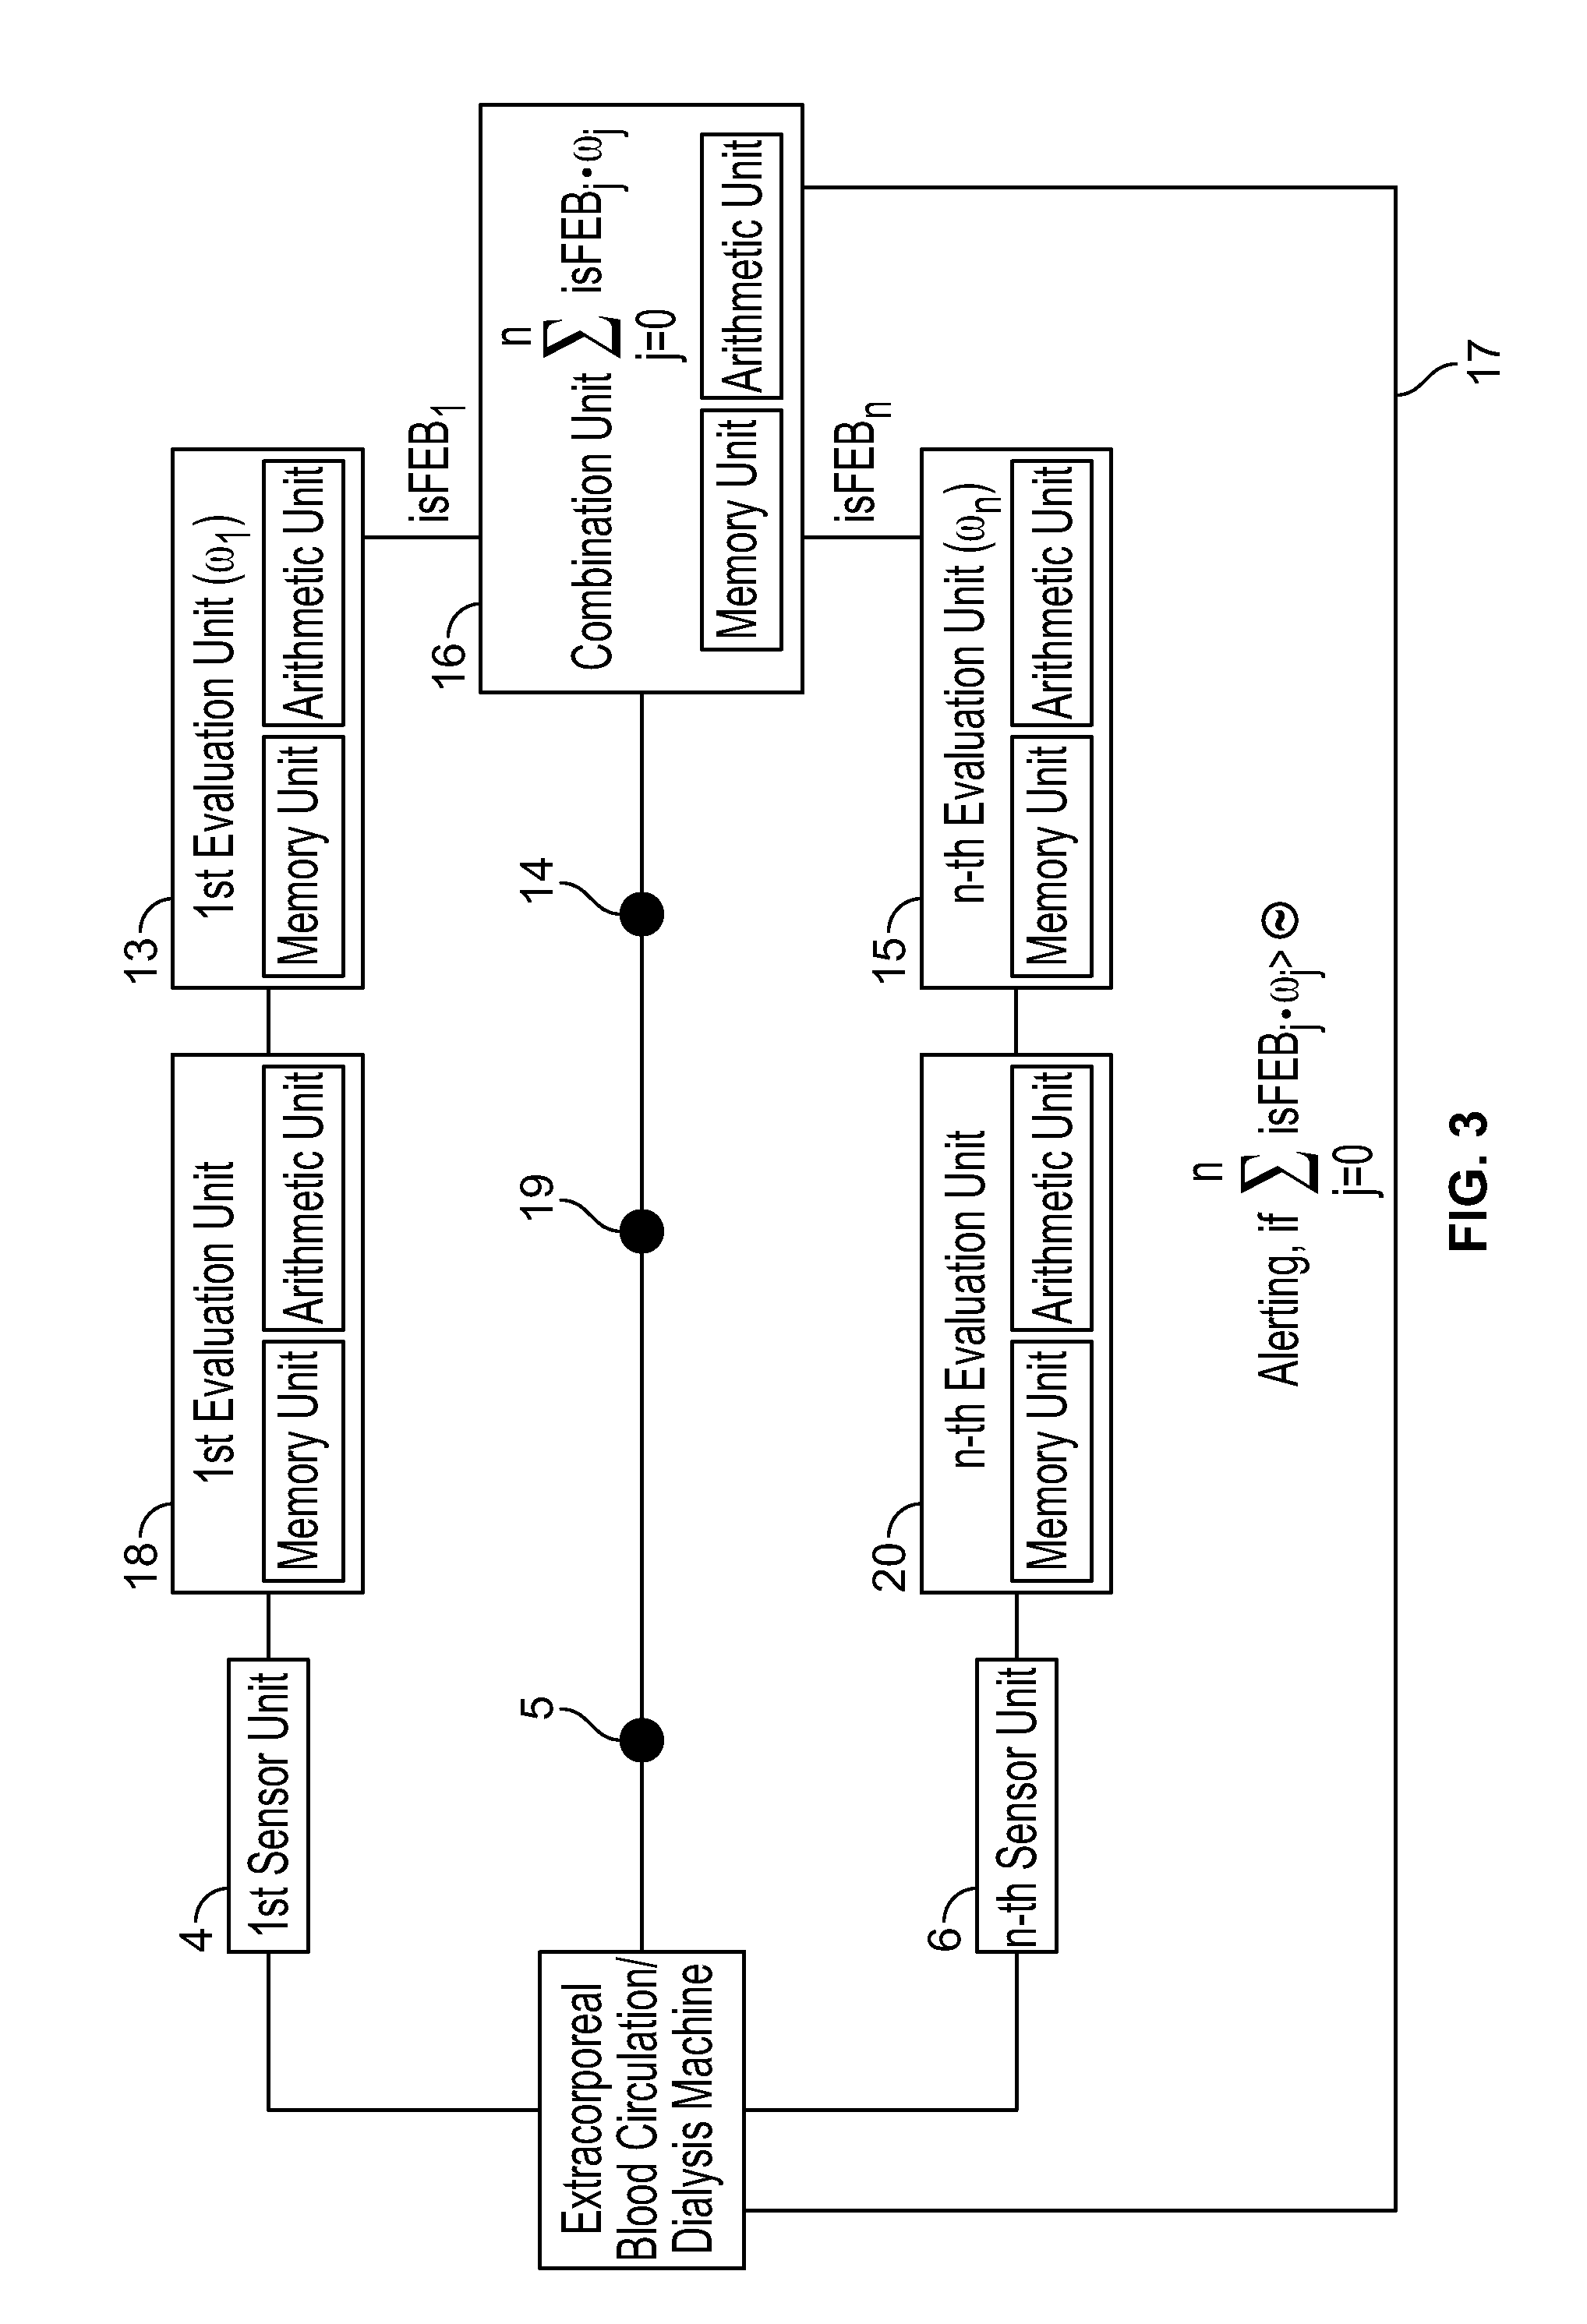 Device and method for identifying a malfunction in an extracorporeal blood circulation